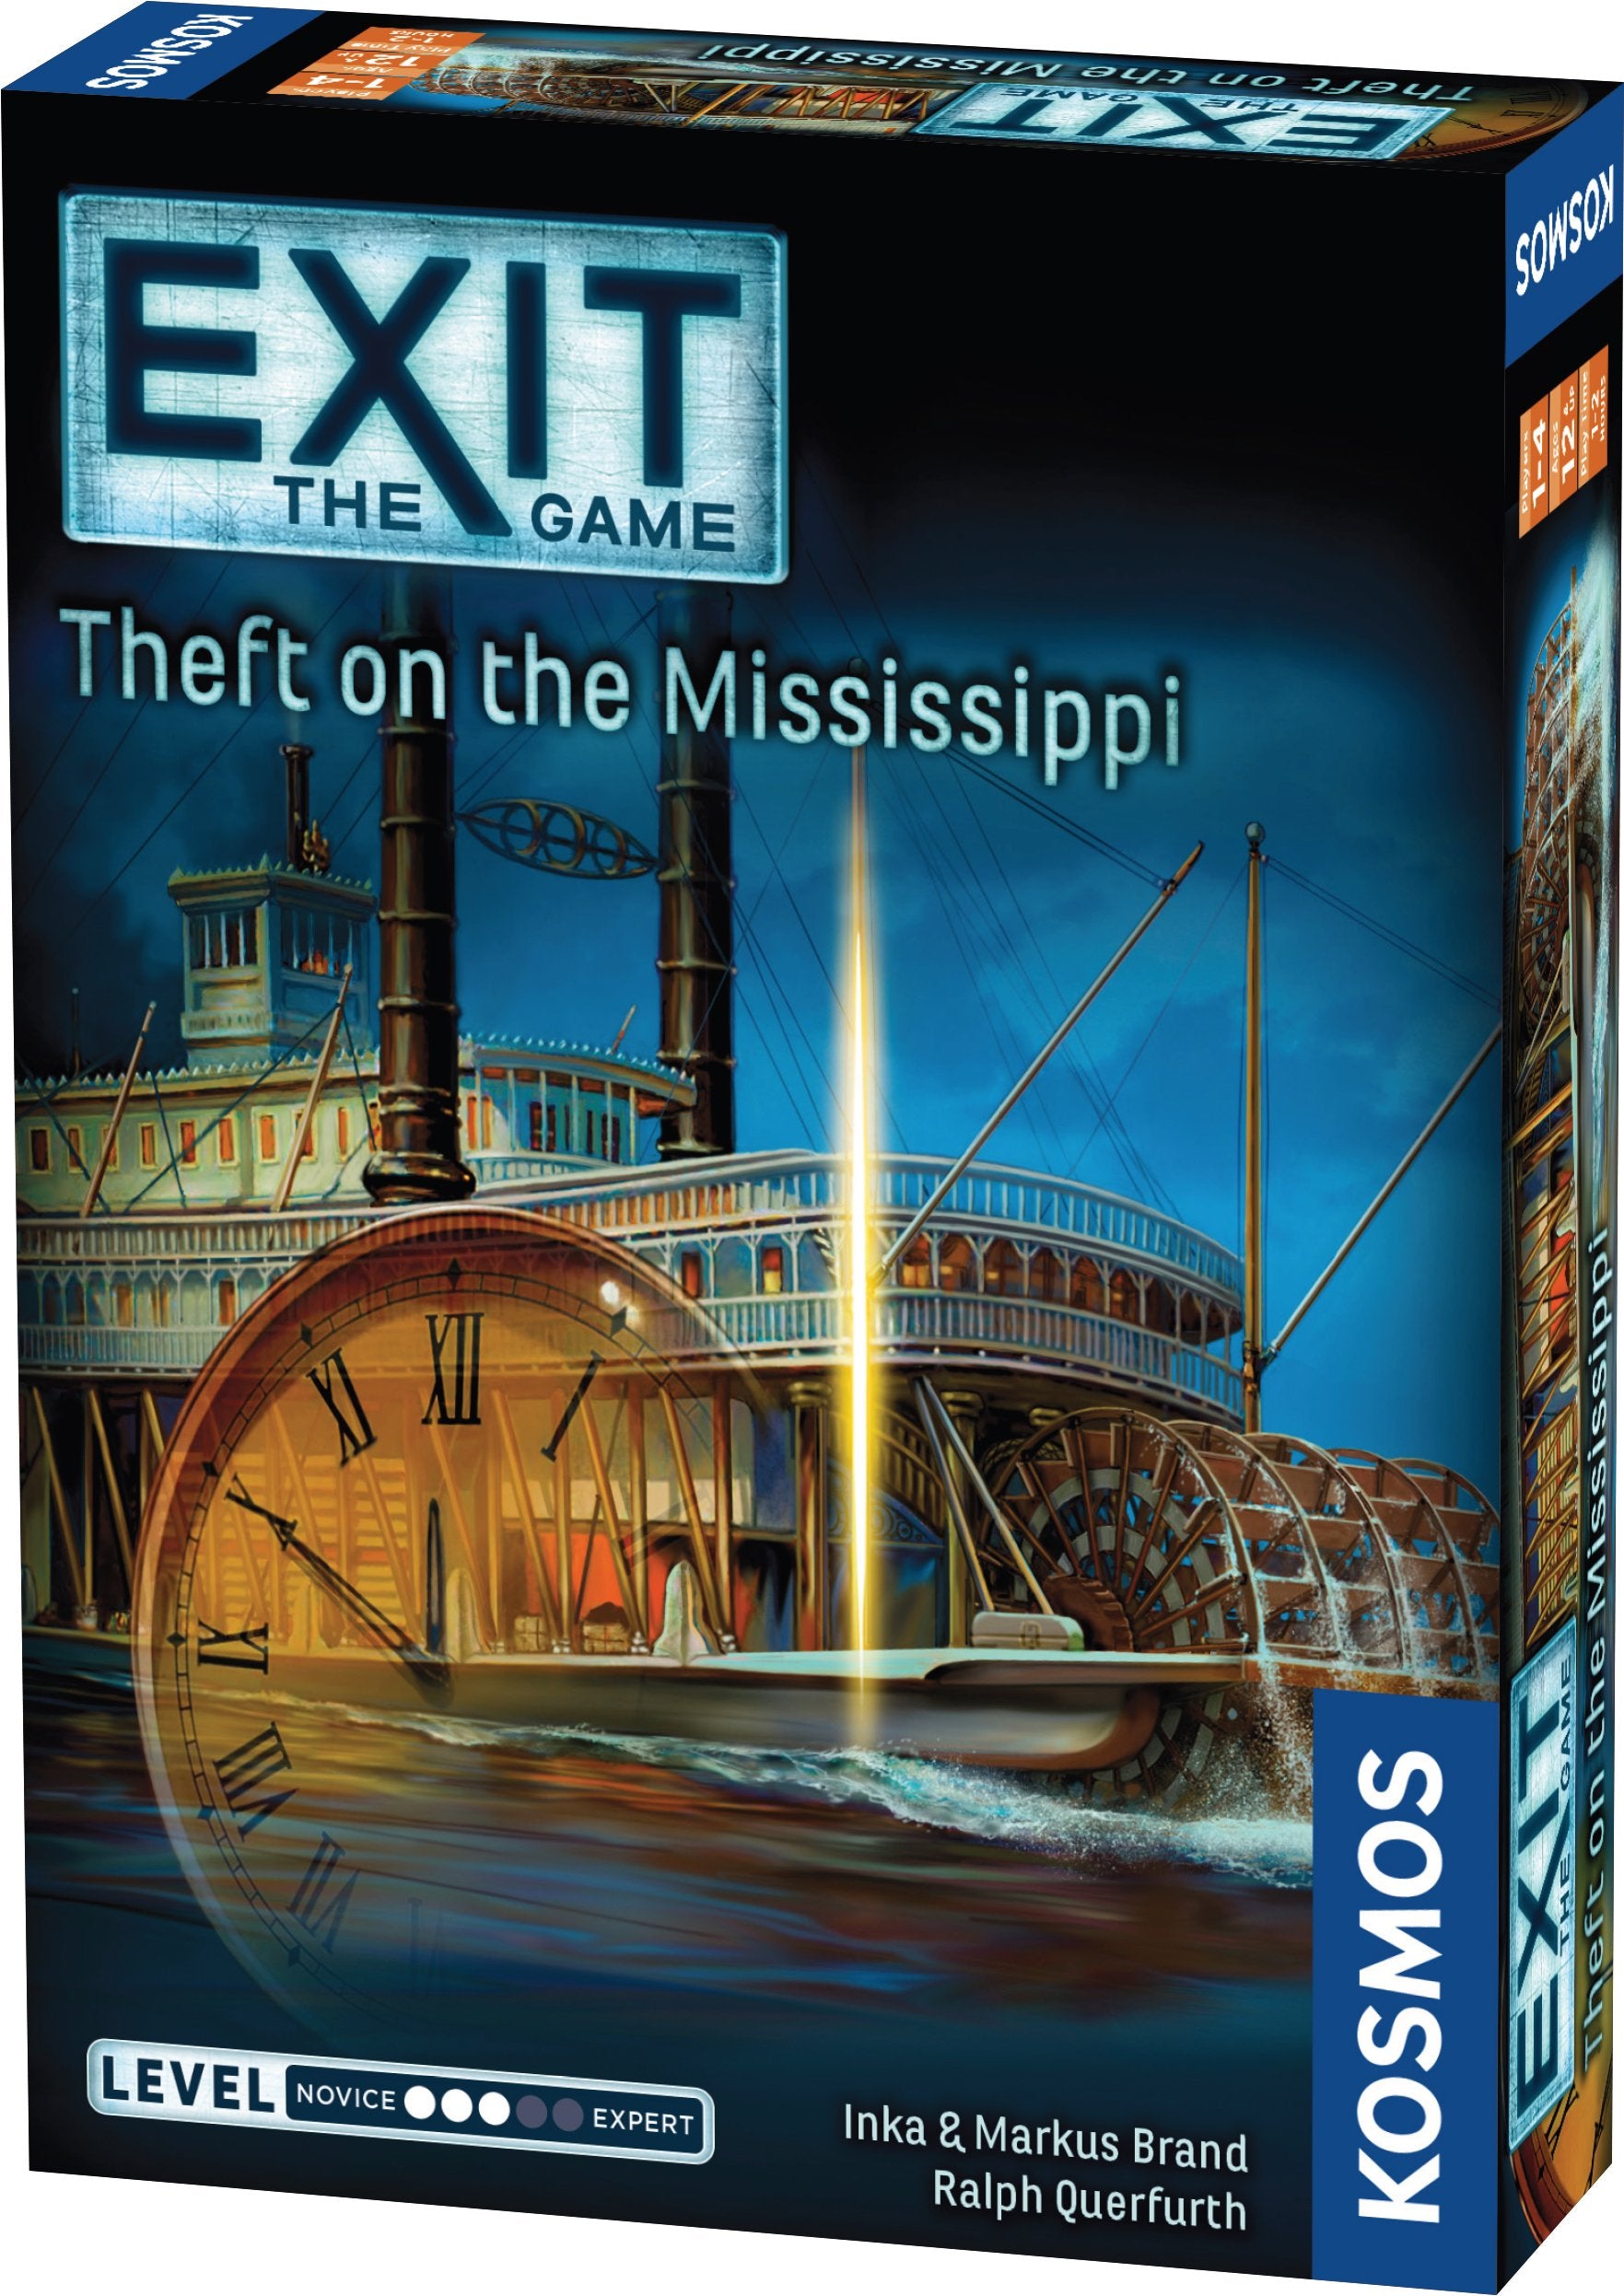 EXIT THE GAME : THEFT ON THE MISSISSIPPI | Play N Trade Winnipeg